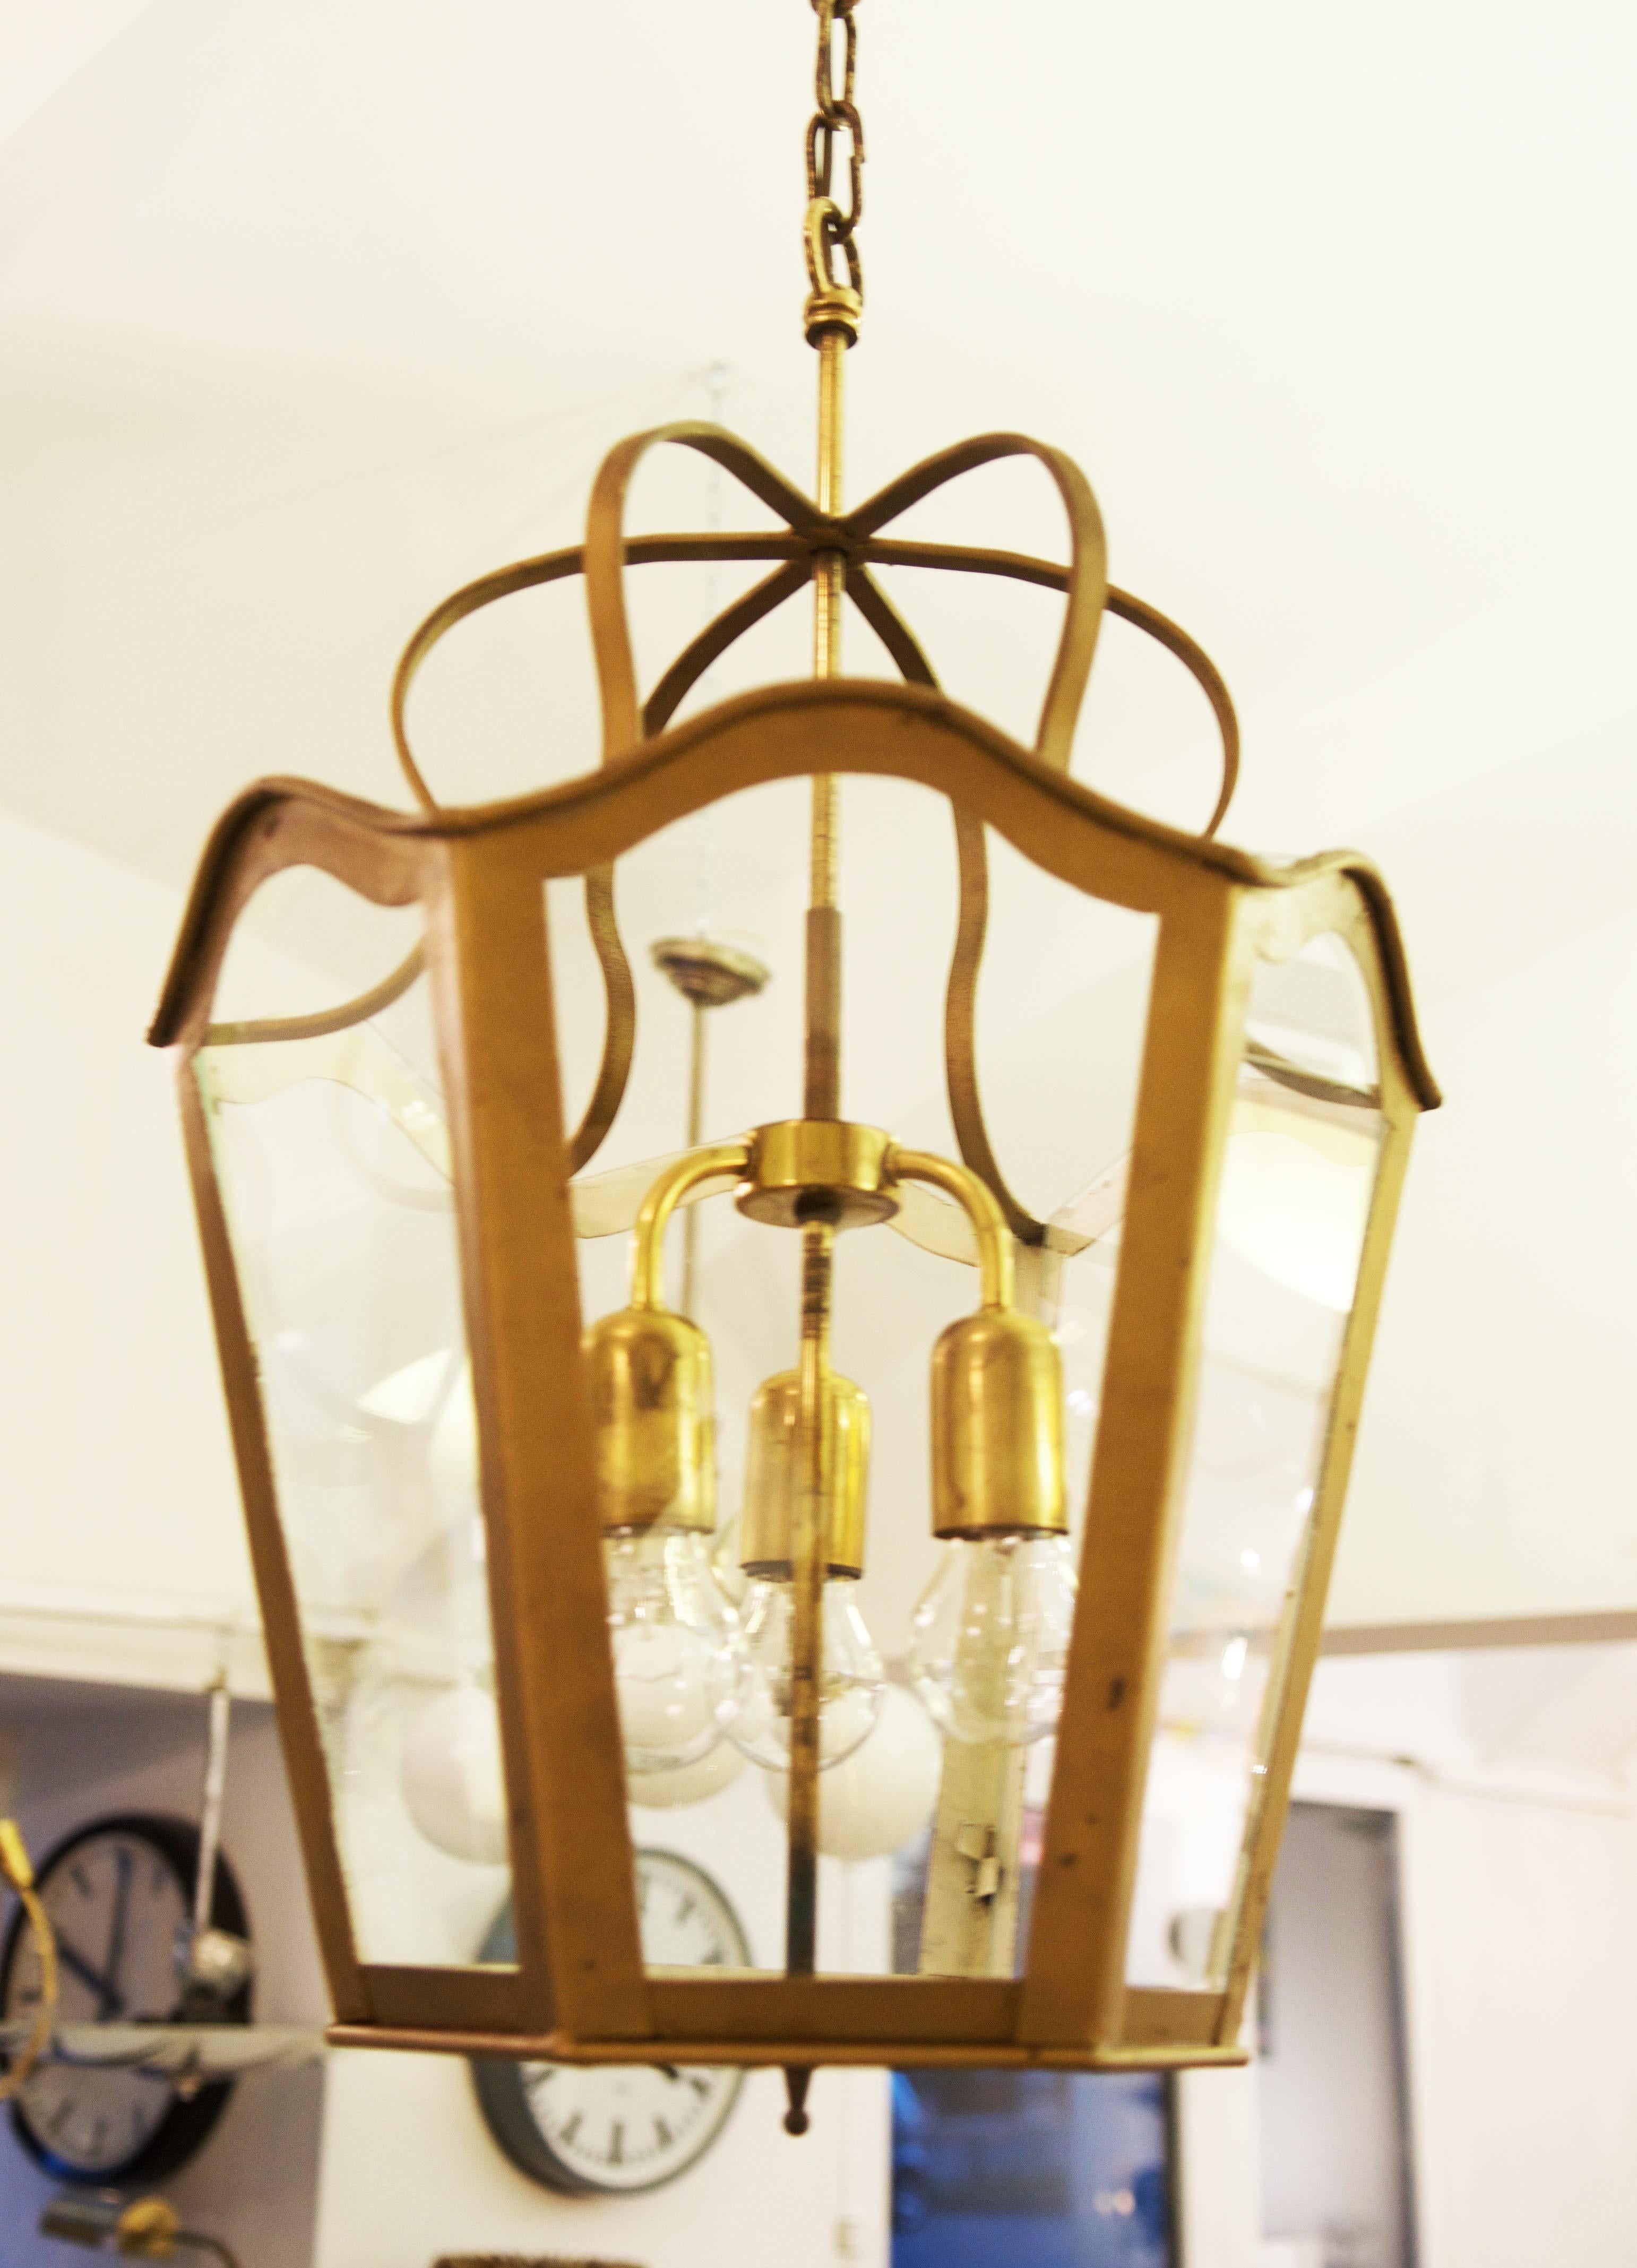 Laten in Art Nouveau style with painted steel and brass frame with six glasess and three E27 Sockets Vienna from the 1960's.
Dimetion of the lamp only: 41x41x64cm (16.14x16.14x25.19inch)